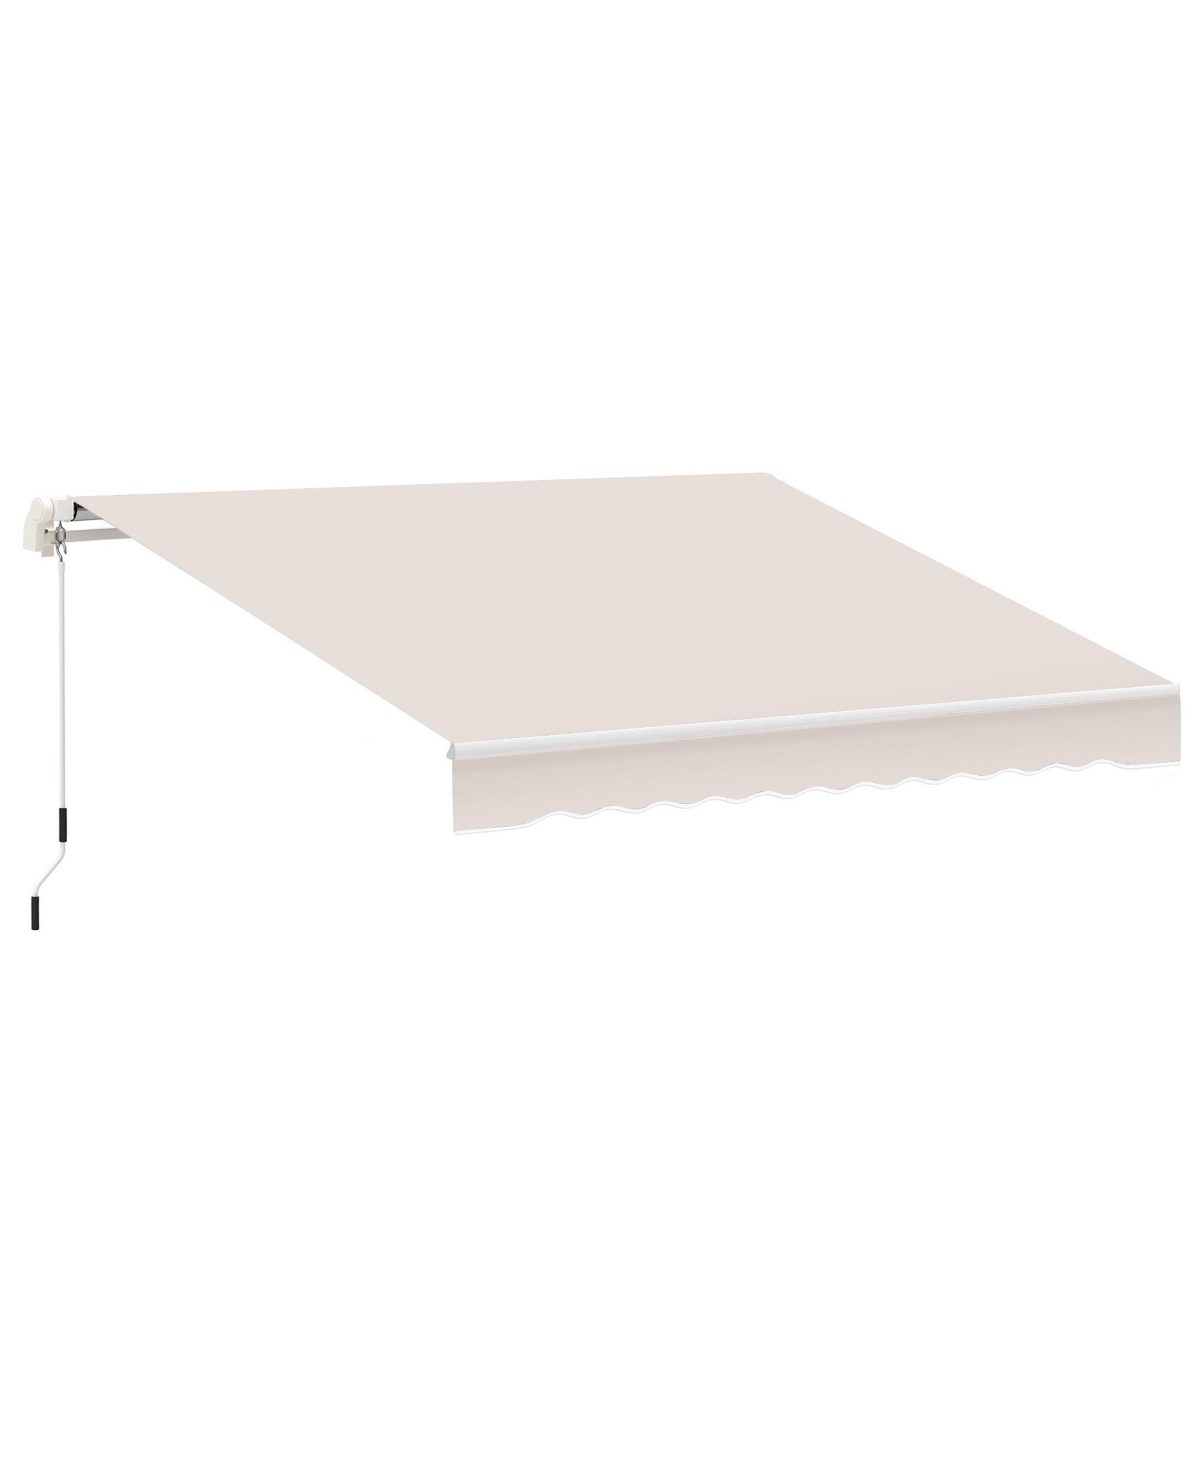 8' x 7' Patio Retractable Awning, Manual Exterior Sun Shade Deck Window Cover, Beige - Beige